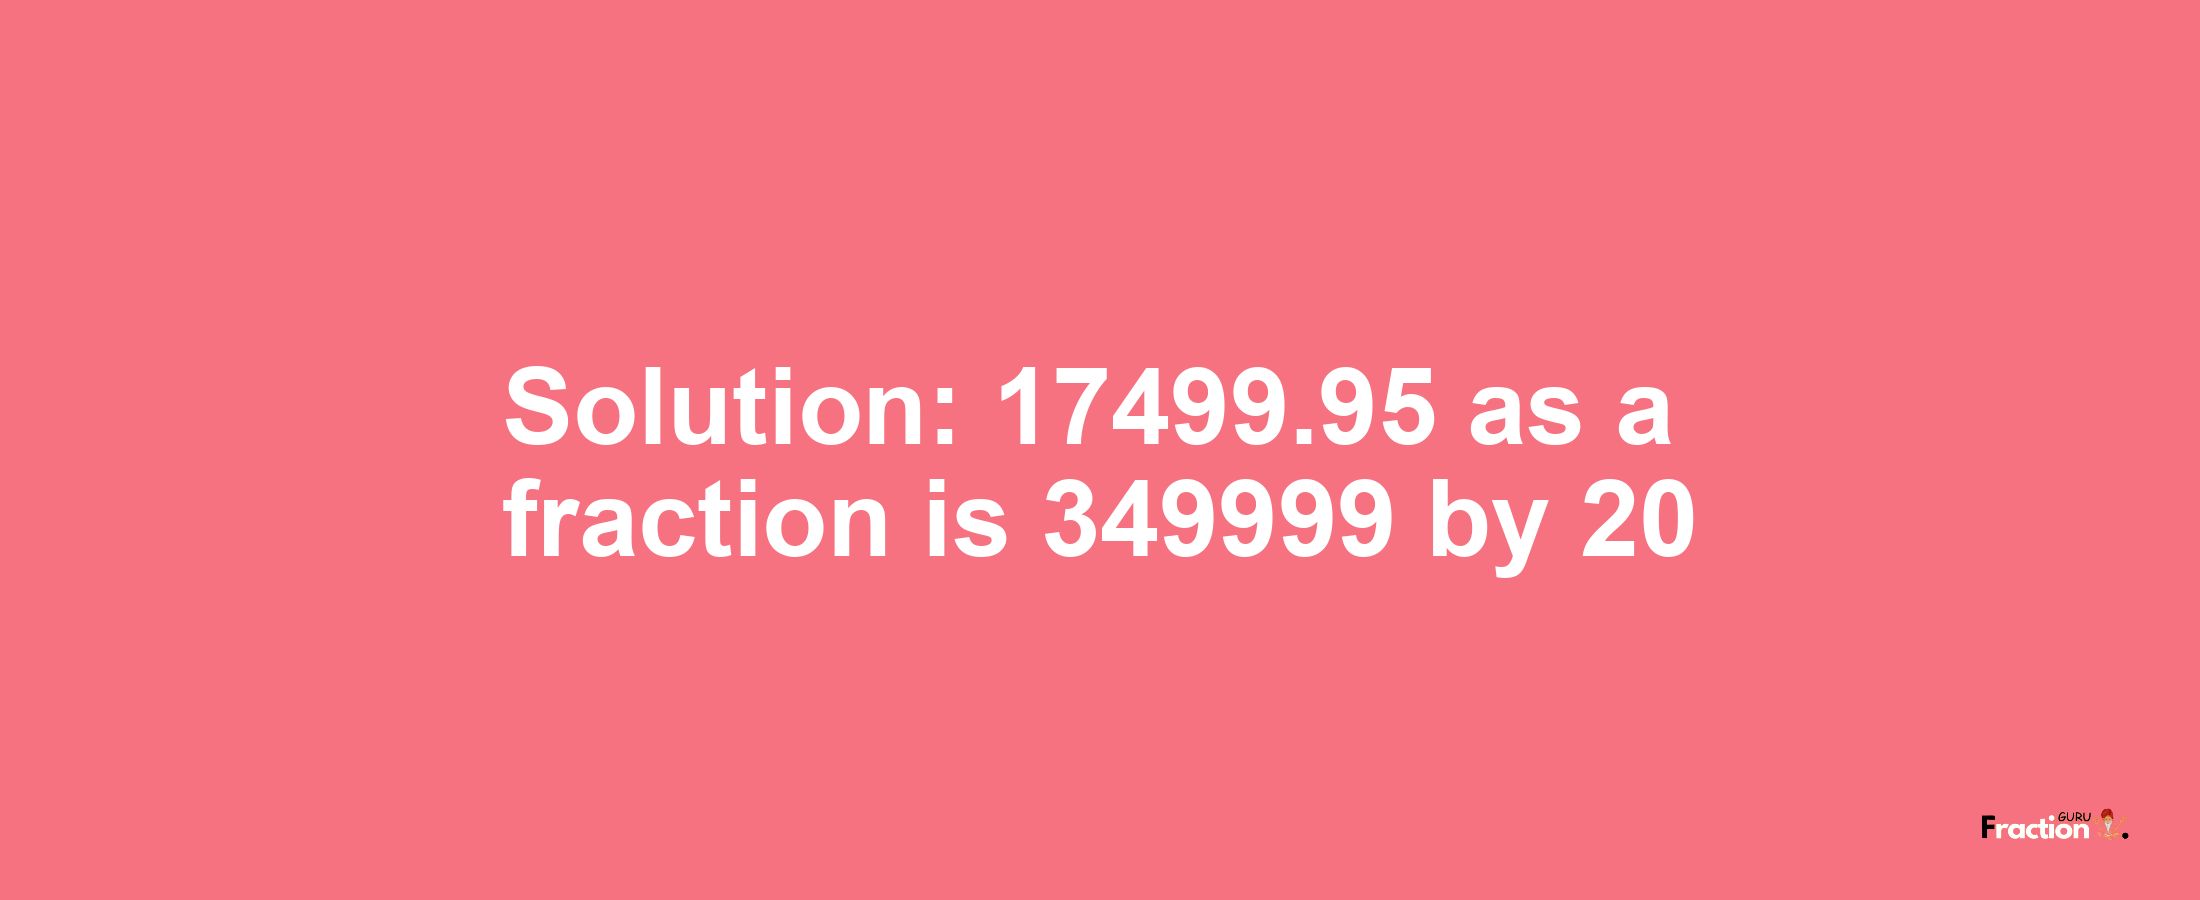 Solution:17499.95 as a fraction is 349999/20